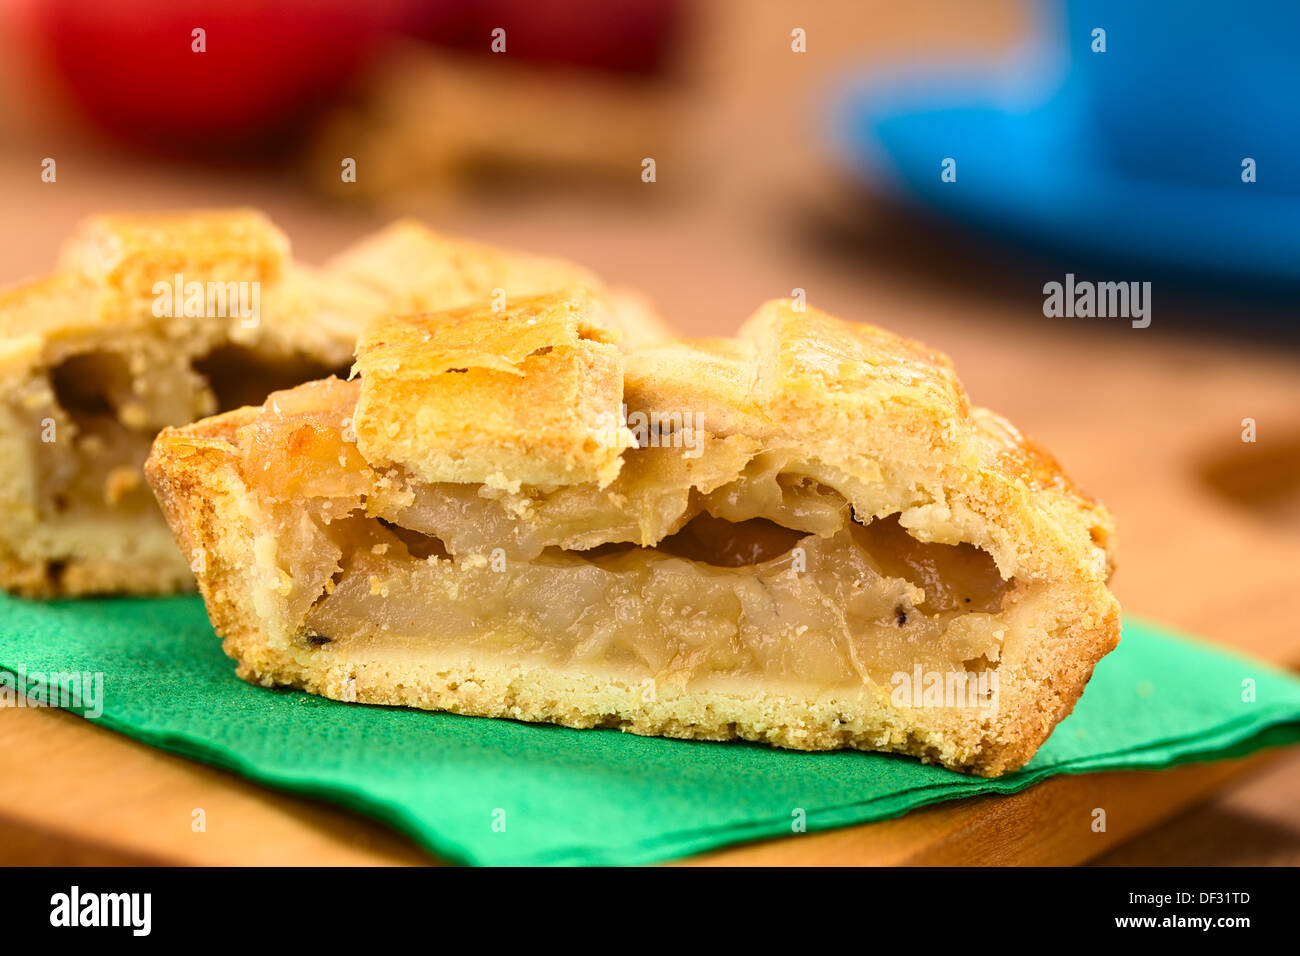 Half apple pie with lattice crust on green napkin on wooden board, with a blue cup, apples and cinnamon sticks in the back Stock Photo